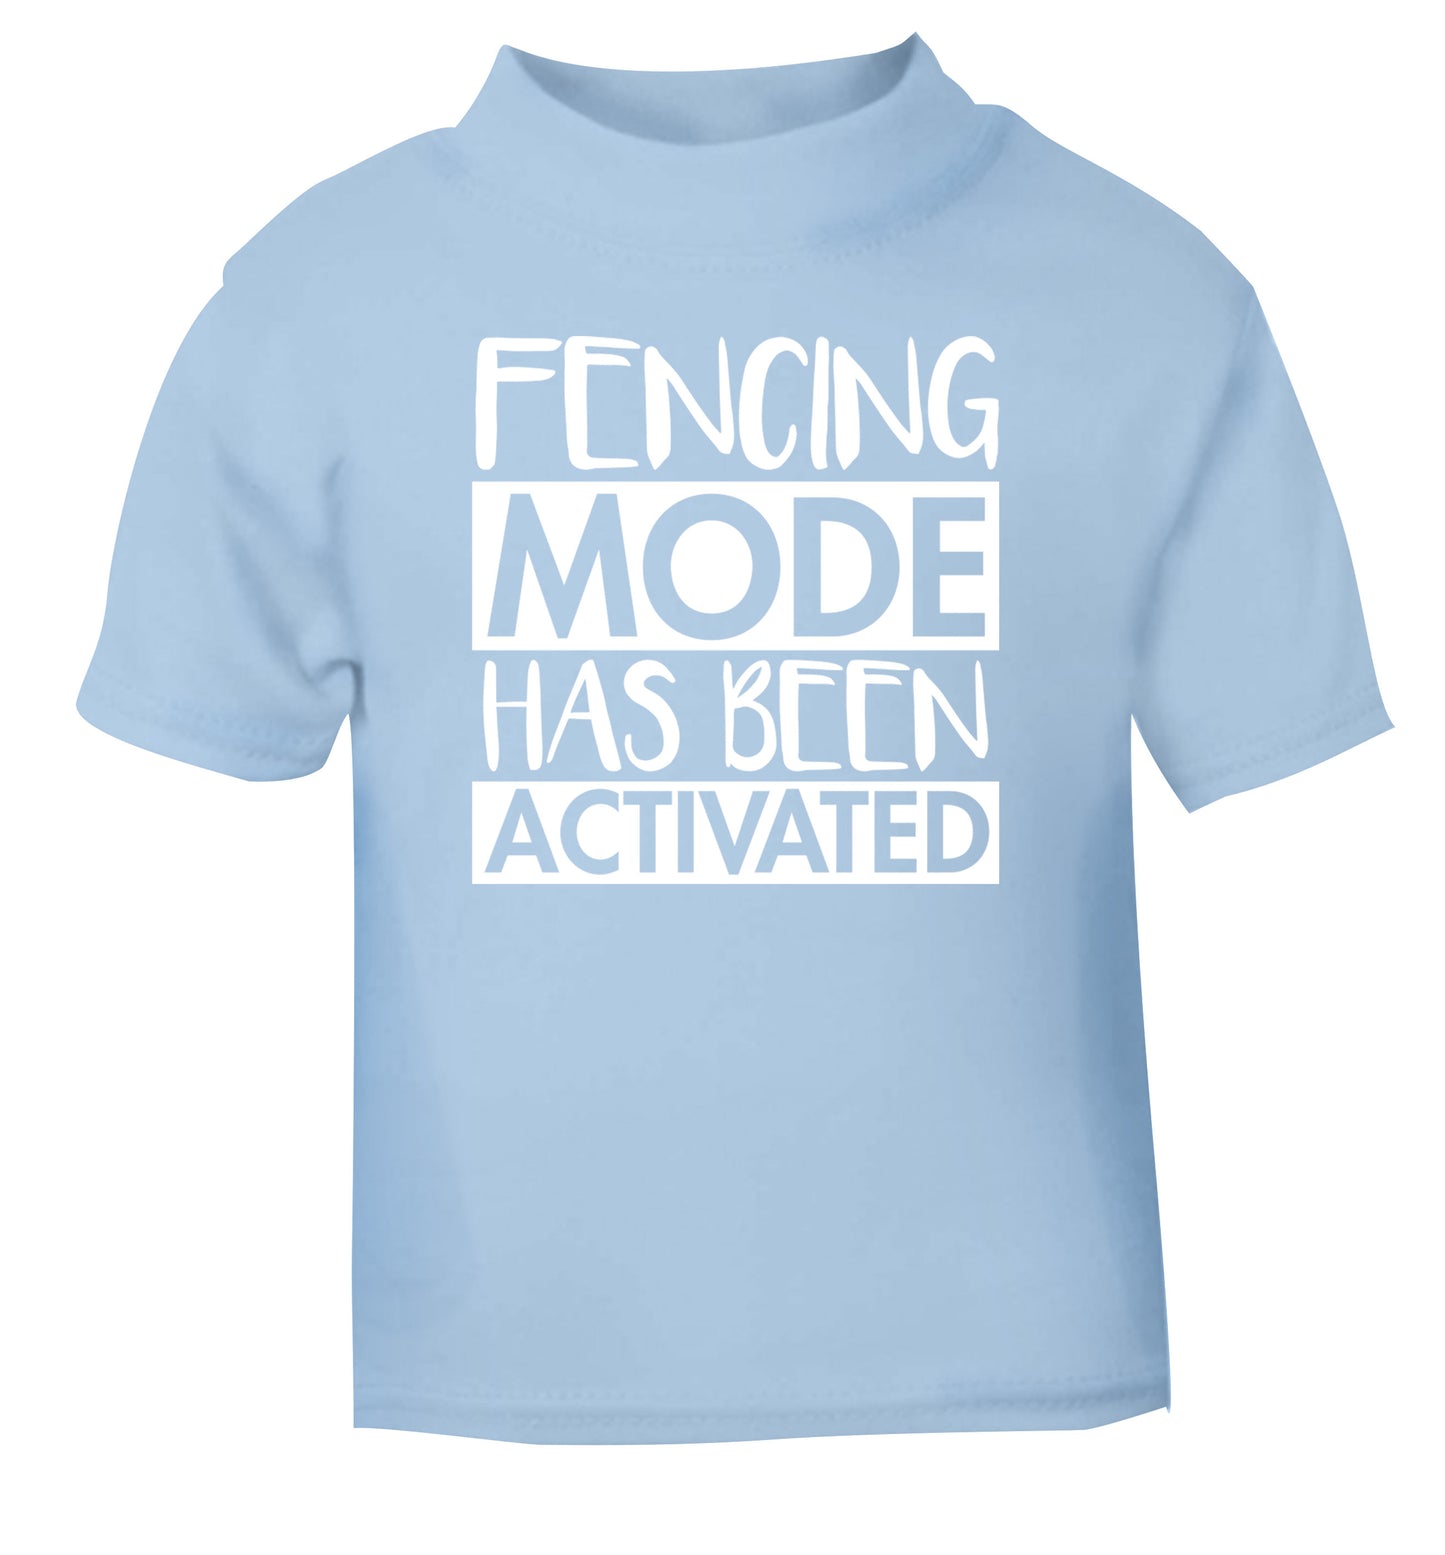 Fencing mode activated light blue Baby Toddler Tshirt 2 Years